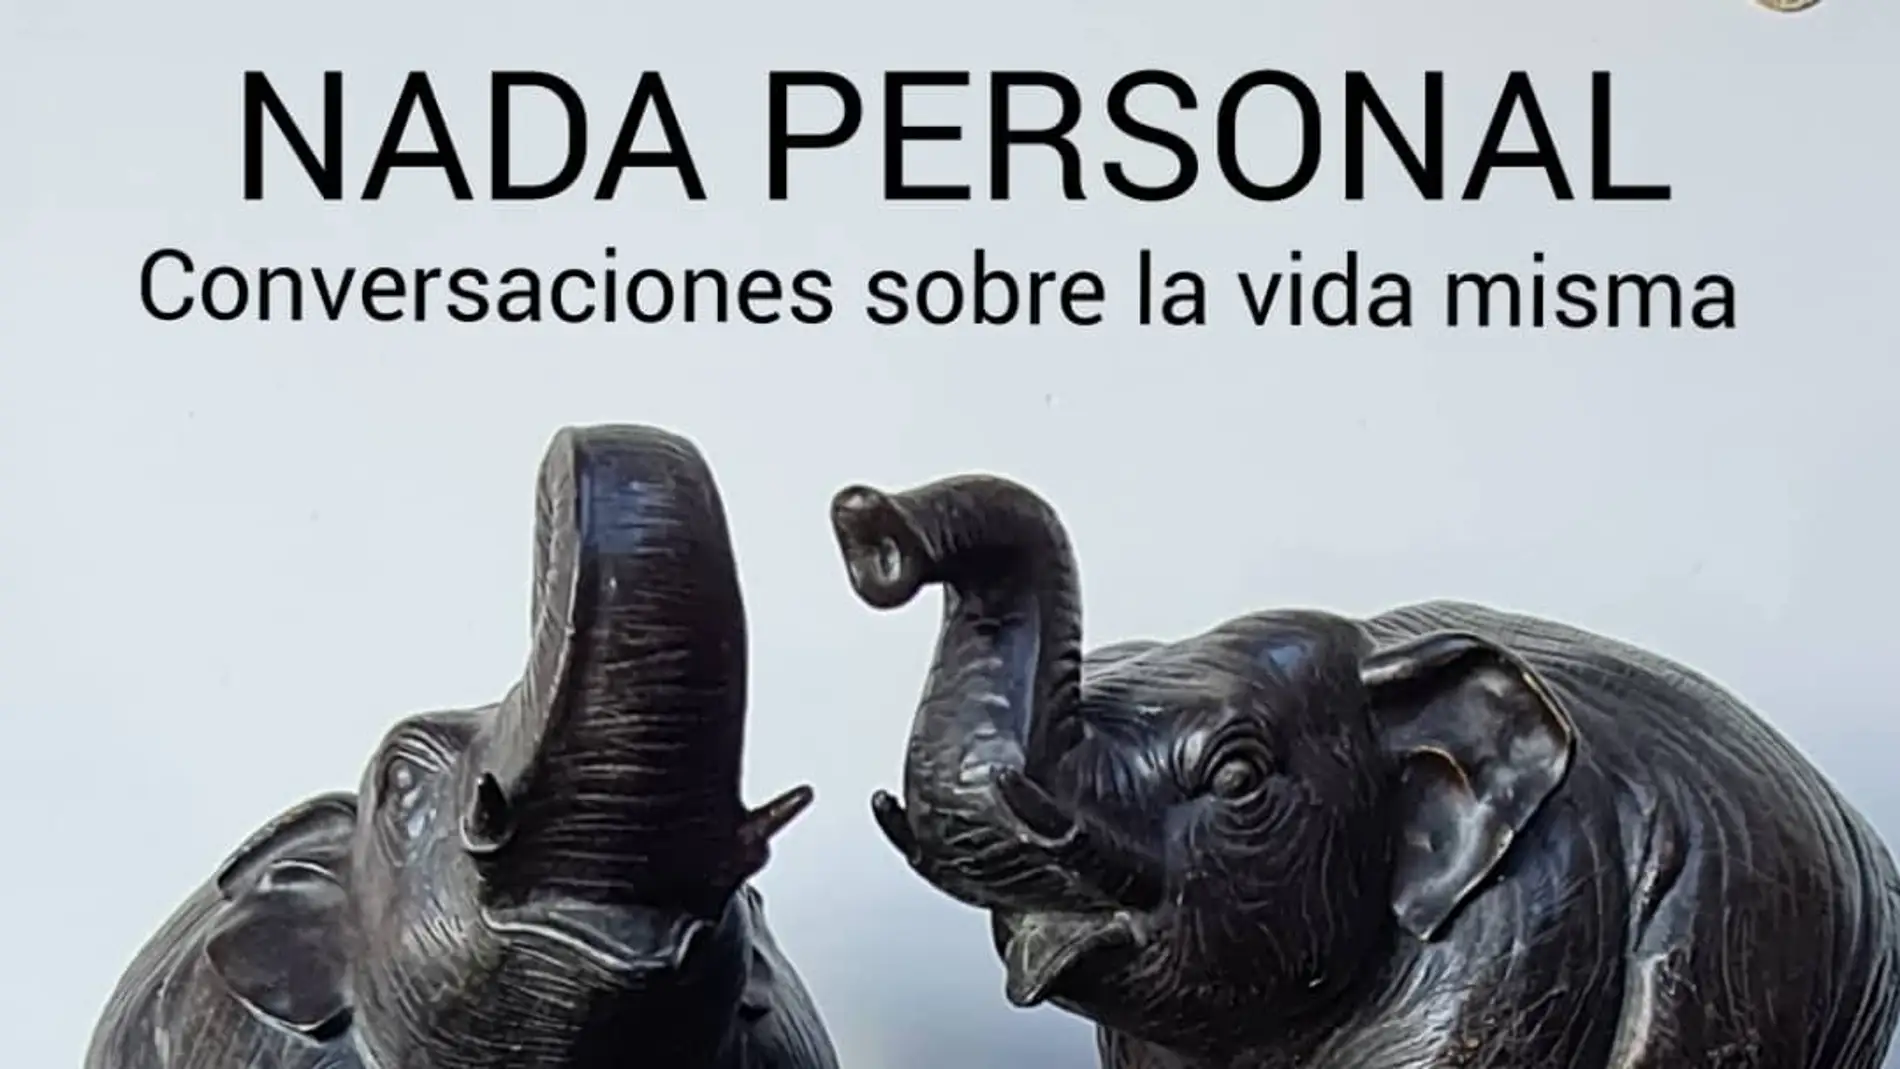 Podcast "Nada personal"